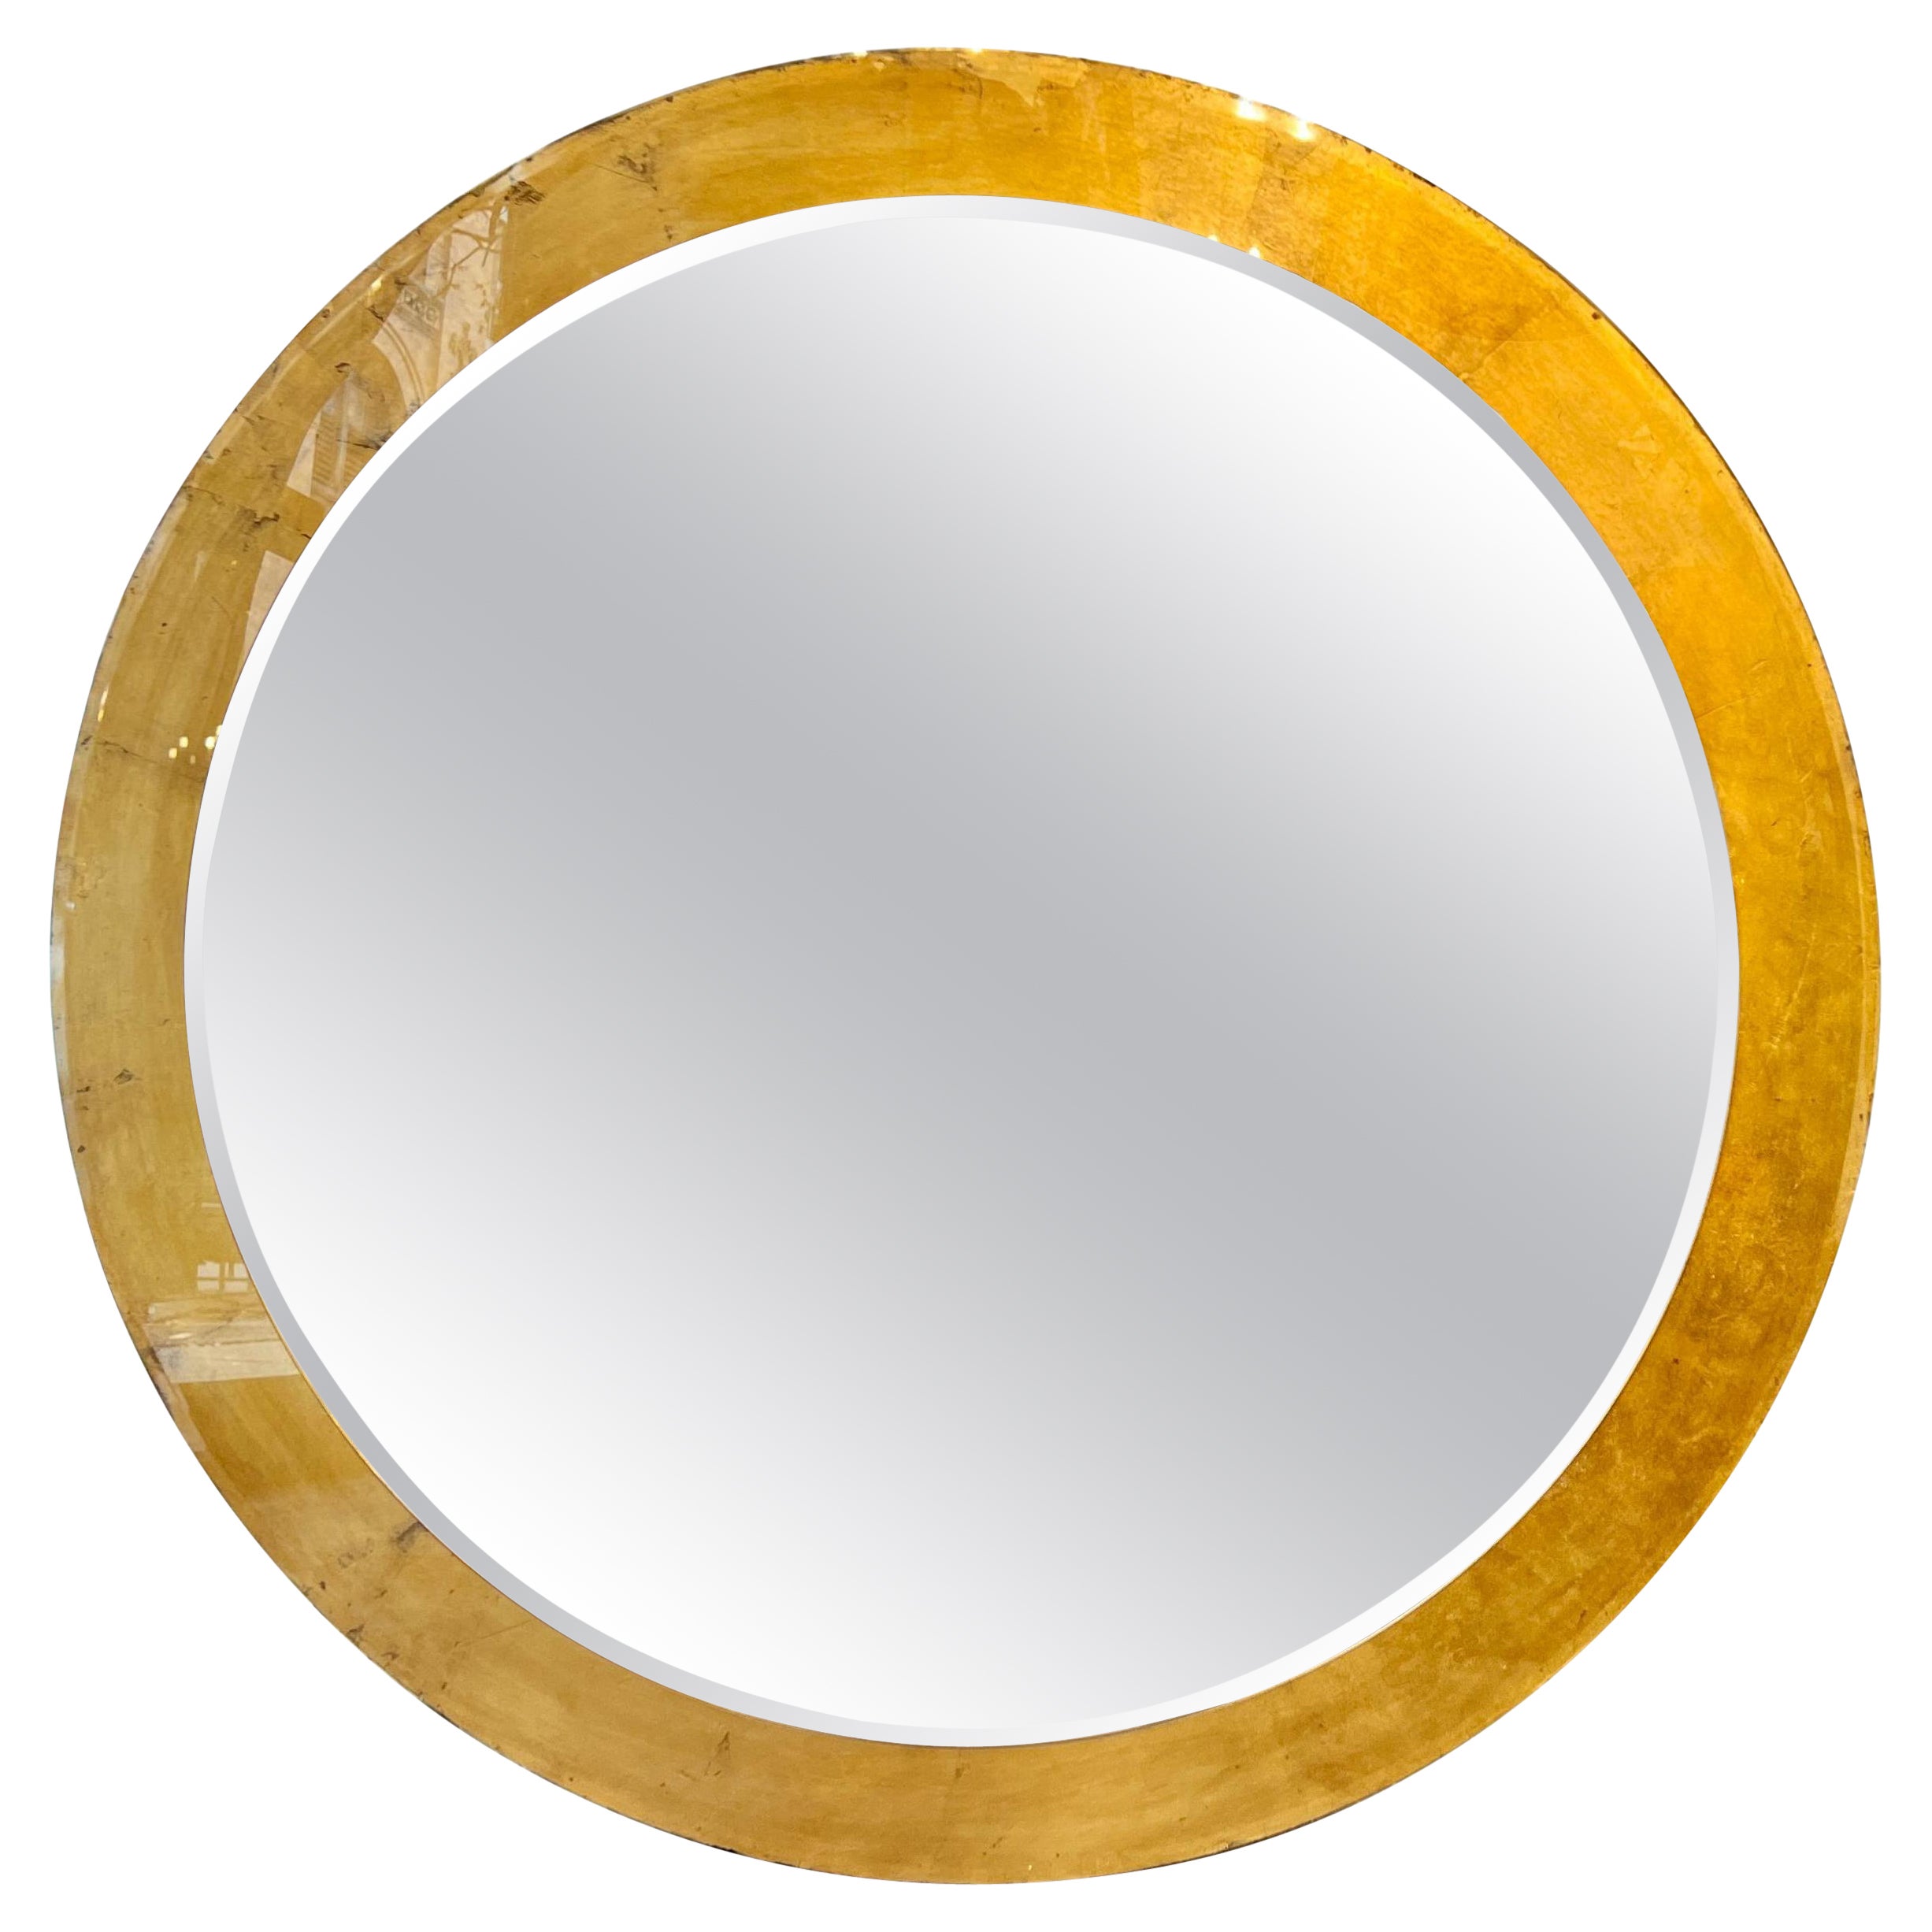 Pair of Italian Moderne Style Mirrors, Sold Individually